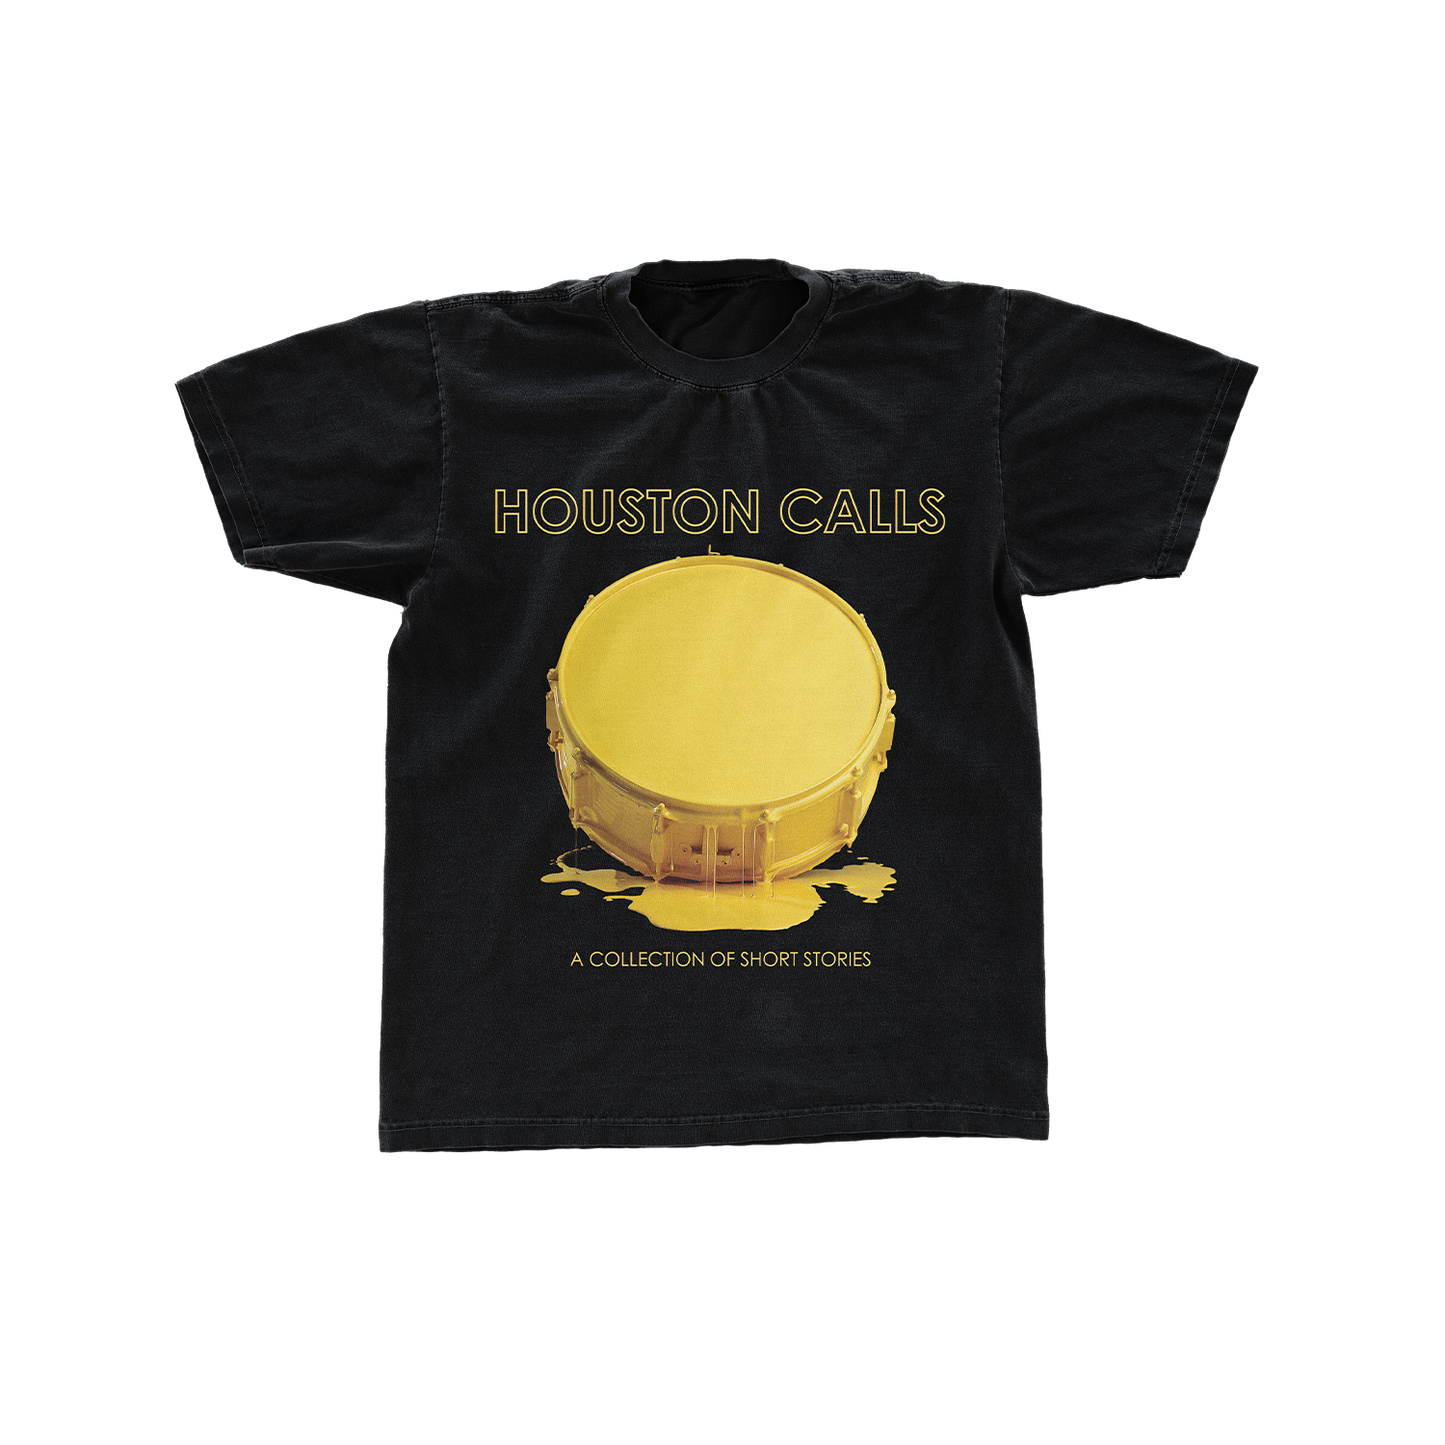 Houston Calls - "A Collection of Short Stories" T-Shirt